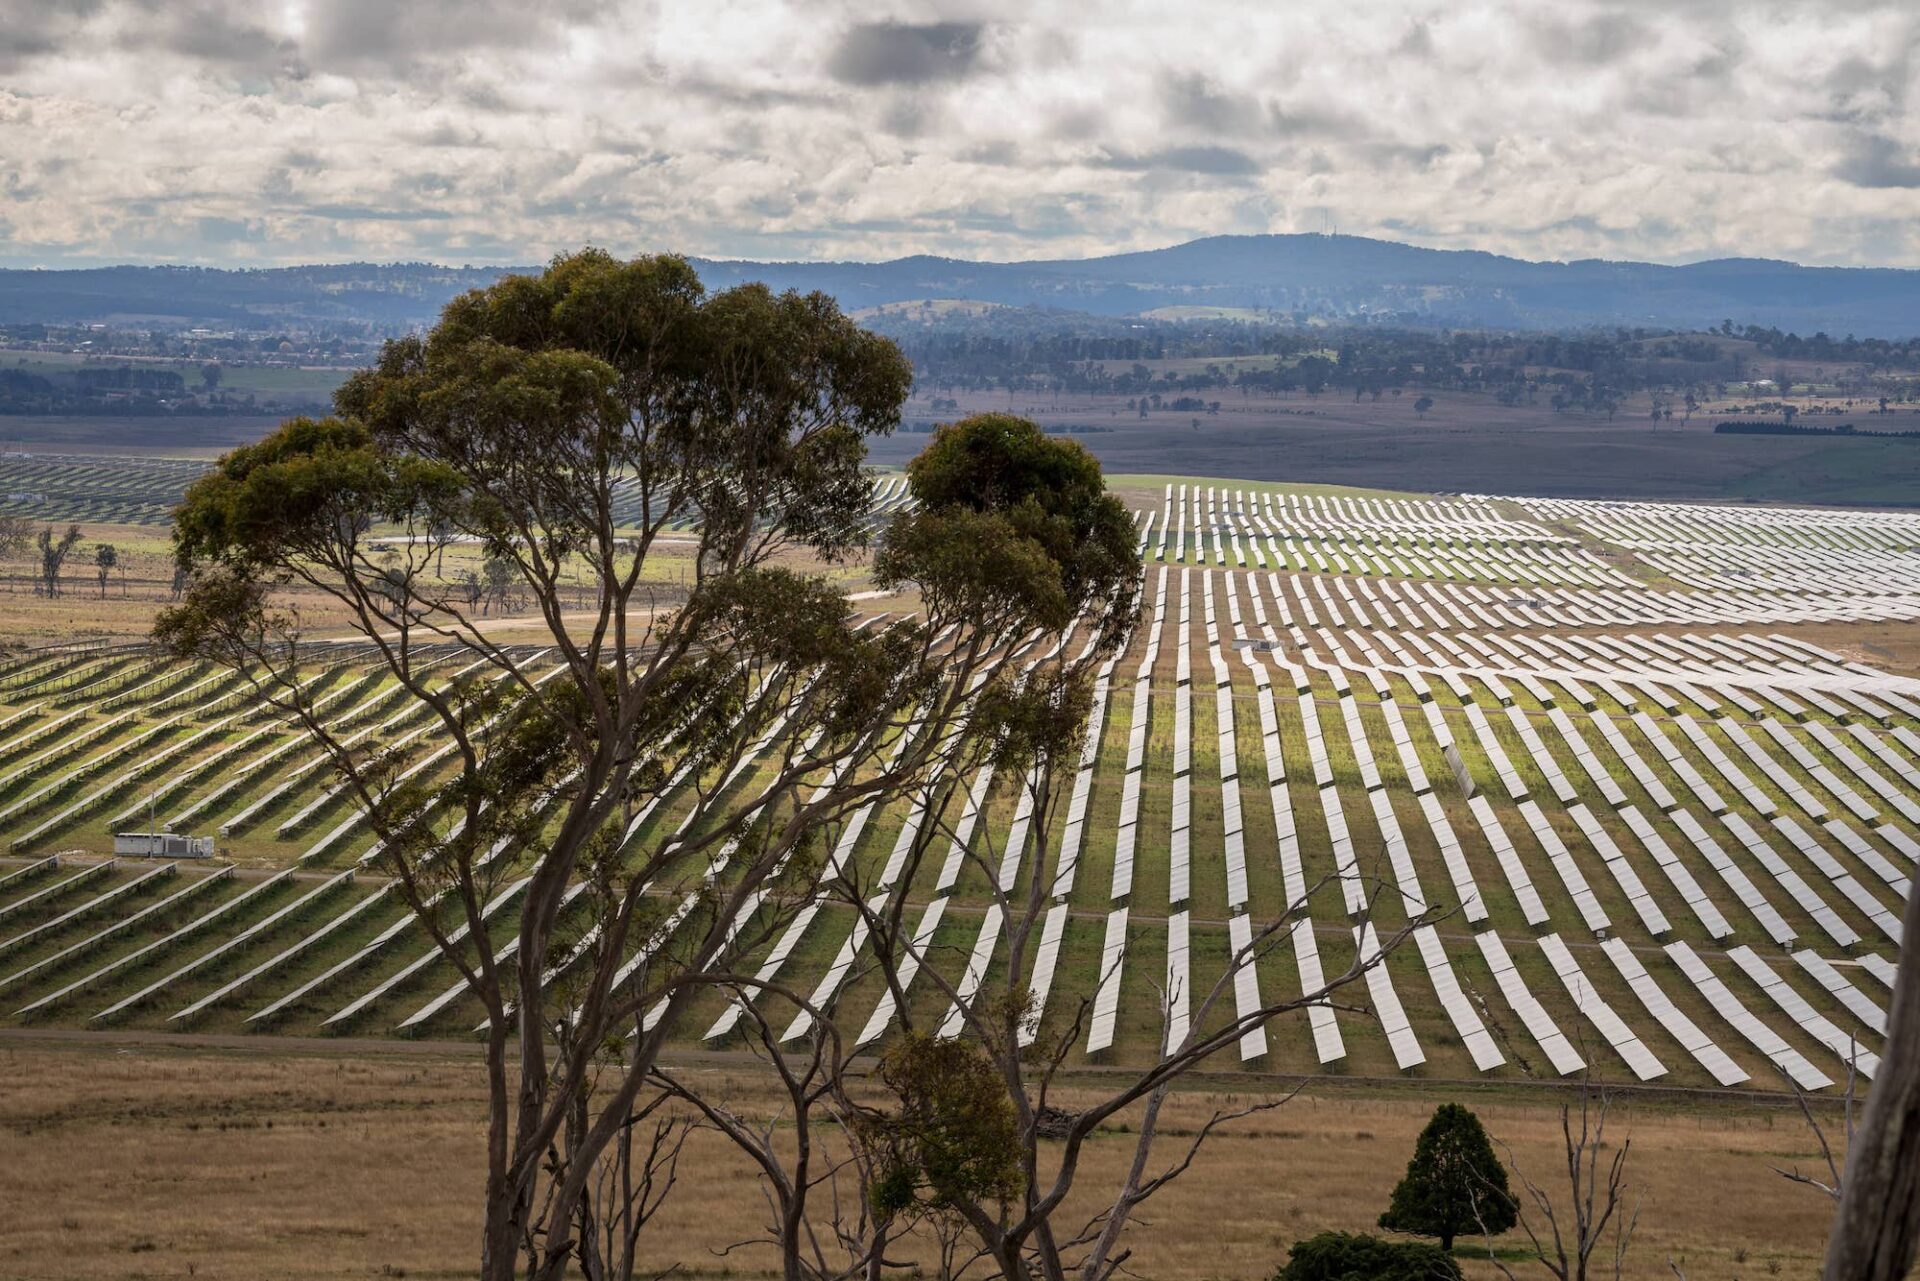 Landscape view of solar farm in Uralla, NSW, with a gum tree in the foreground.